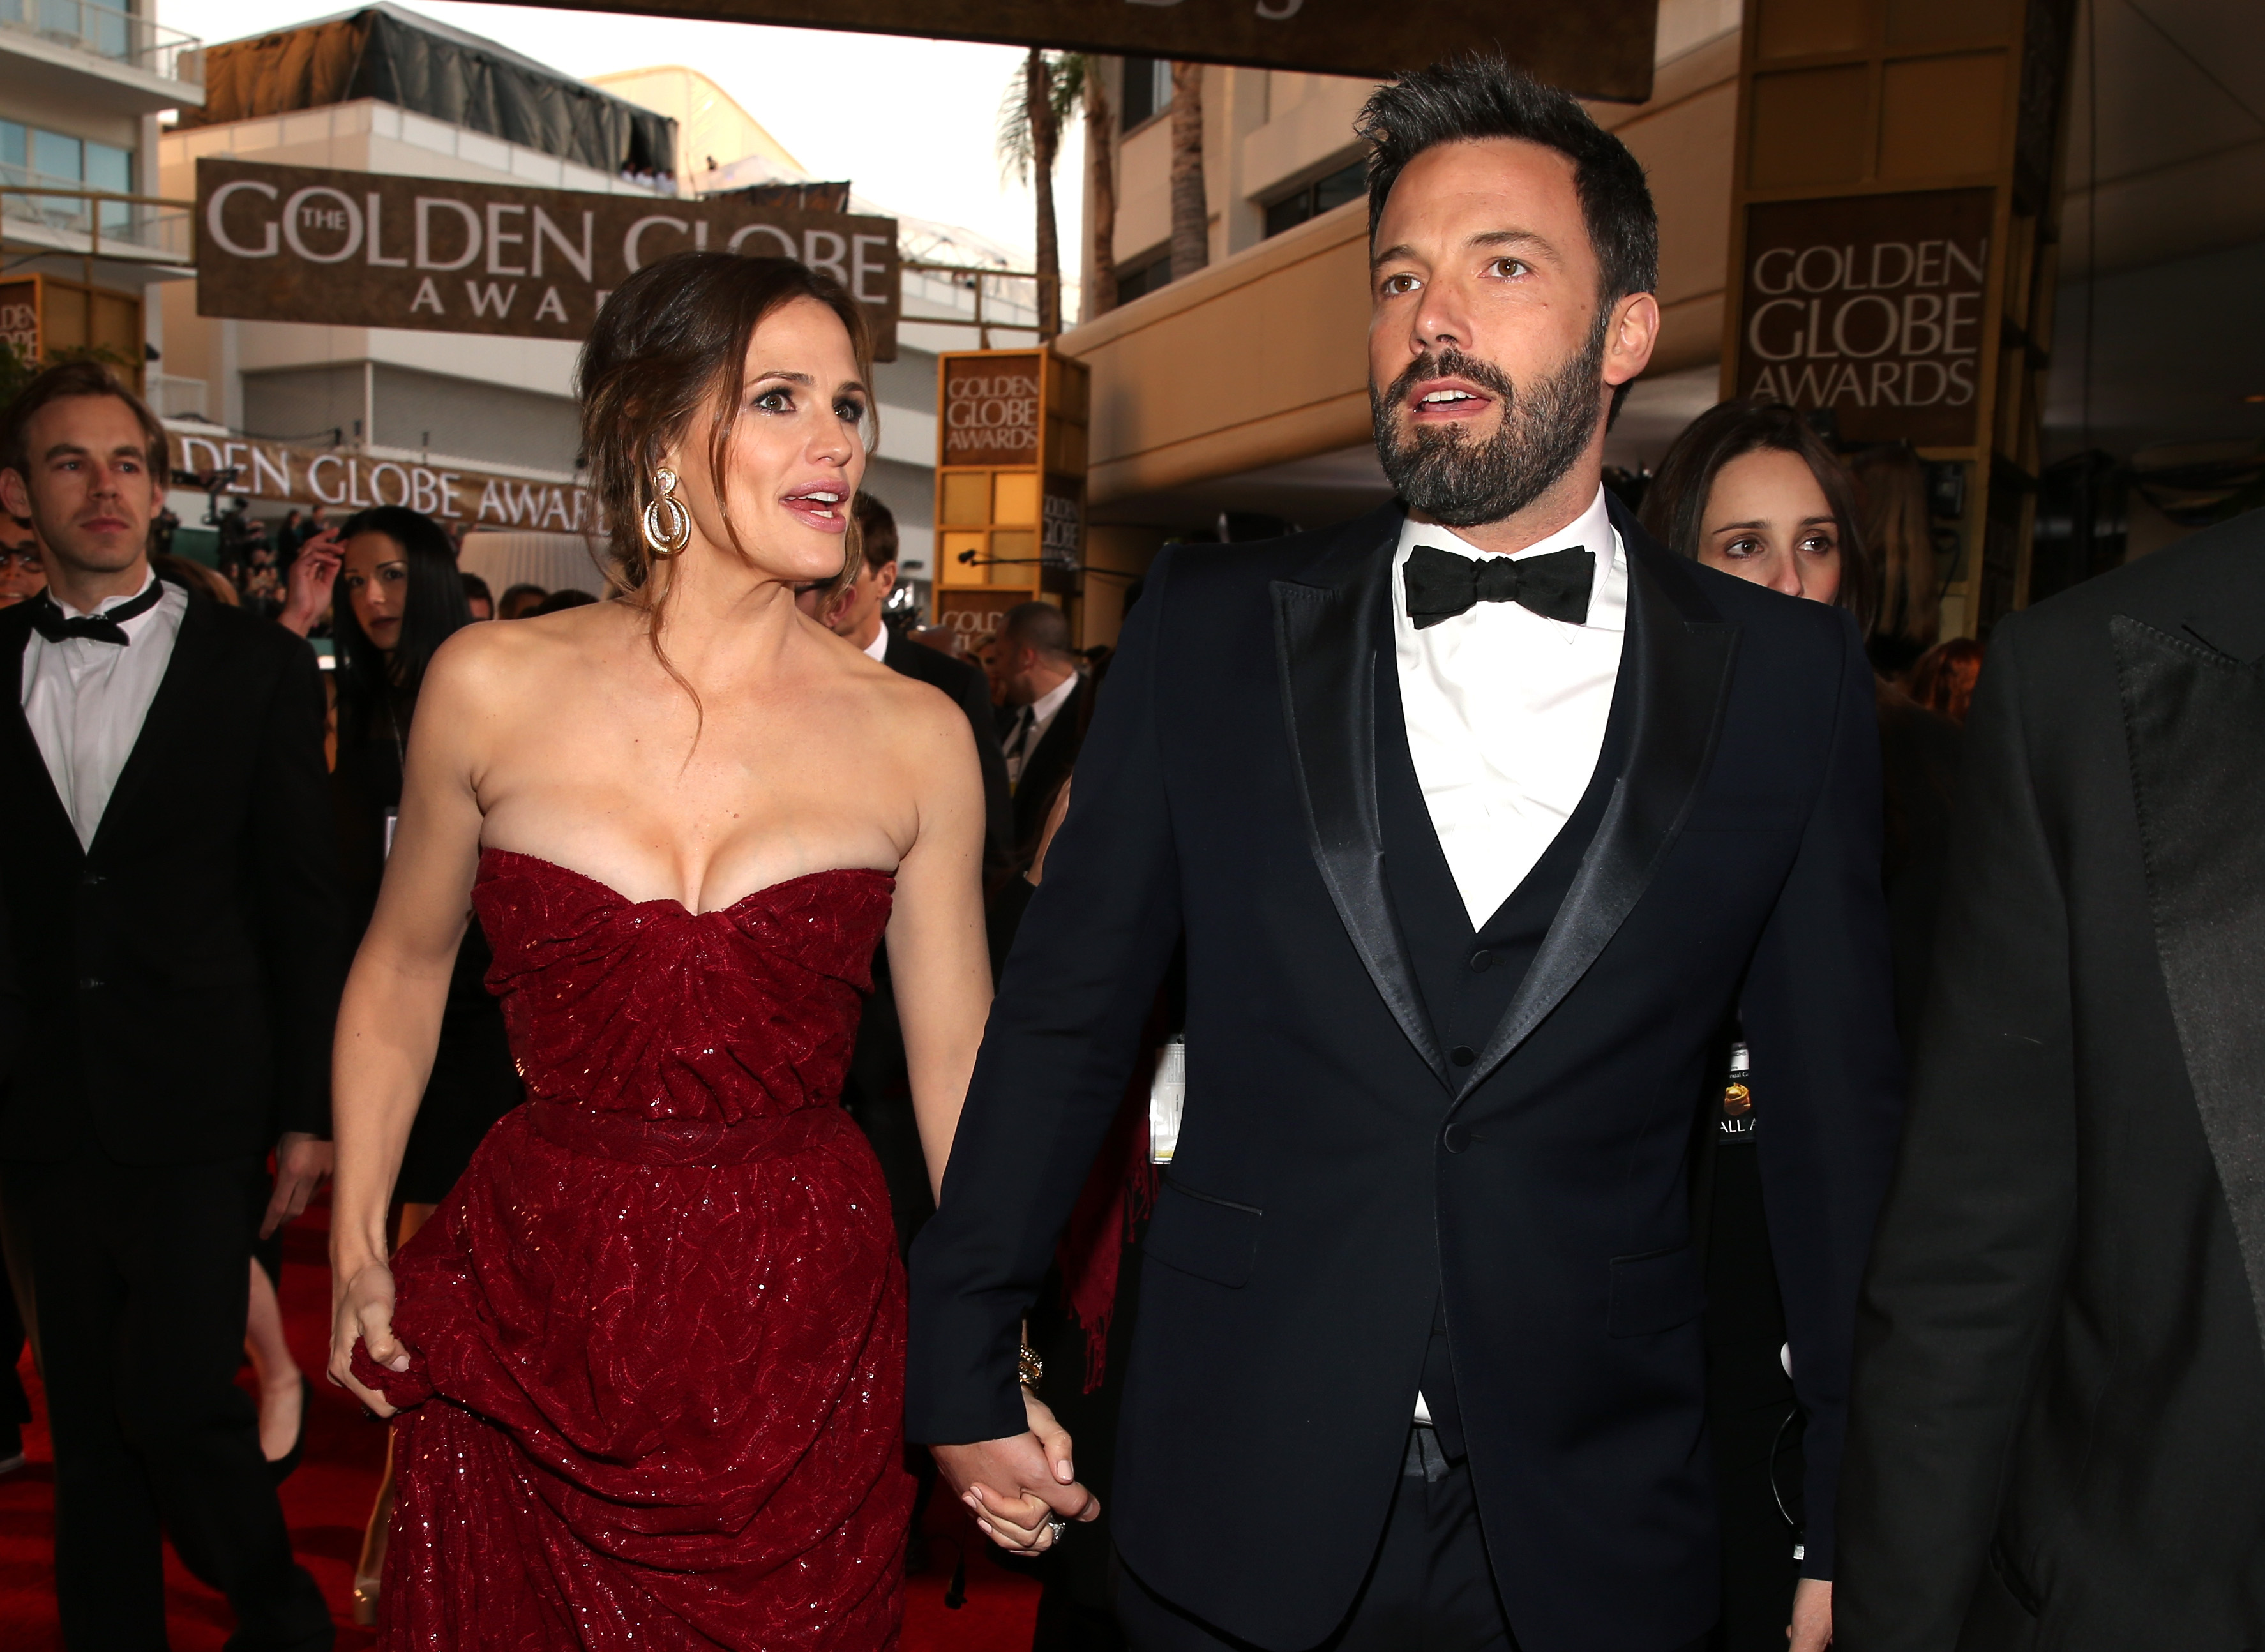 Jennifer Garner and Ben Affleck at the 70th Annual Golden Globe Awards on January 13, 2013 | Source: Getty Images